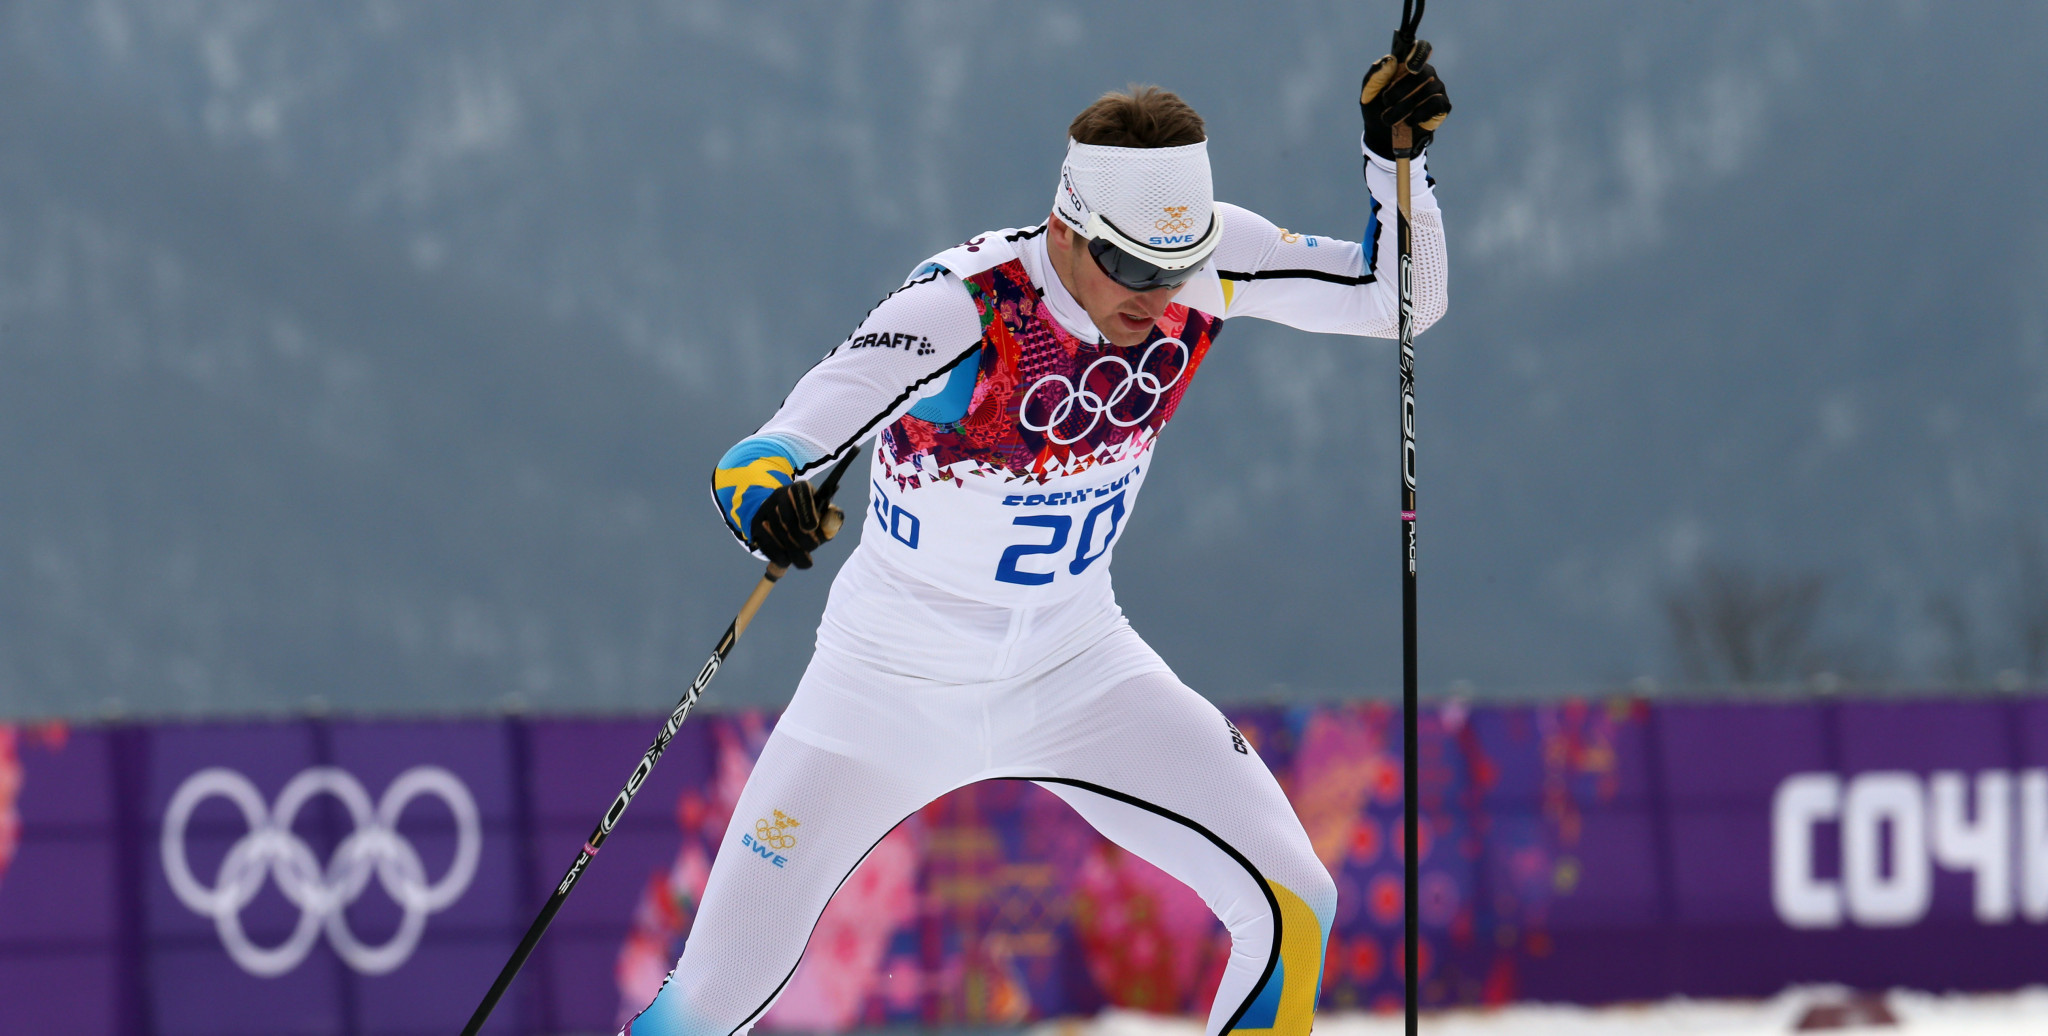 Teodor Peterson earned two Olympic medals at Sochi 2014 ©Getty Images